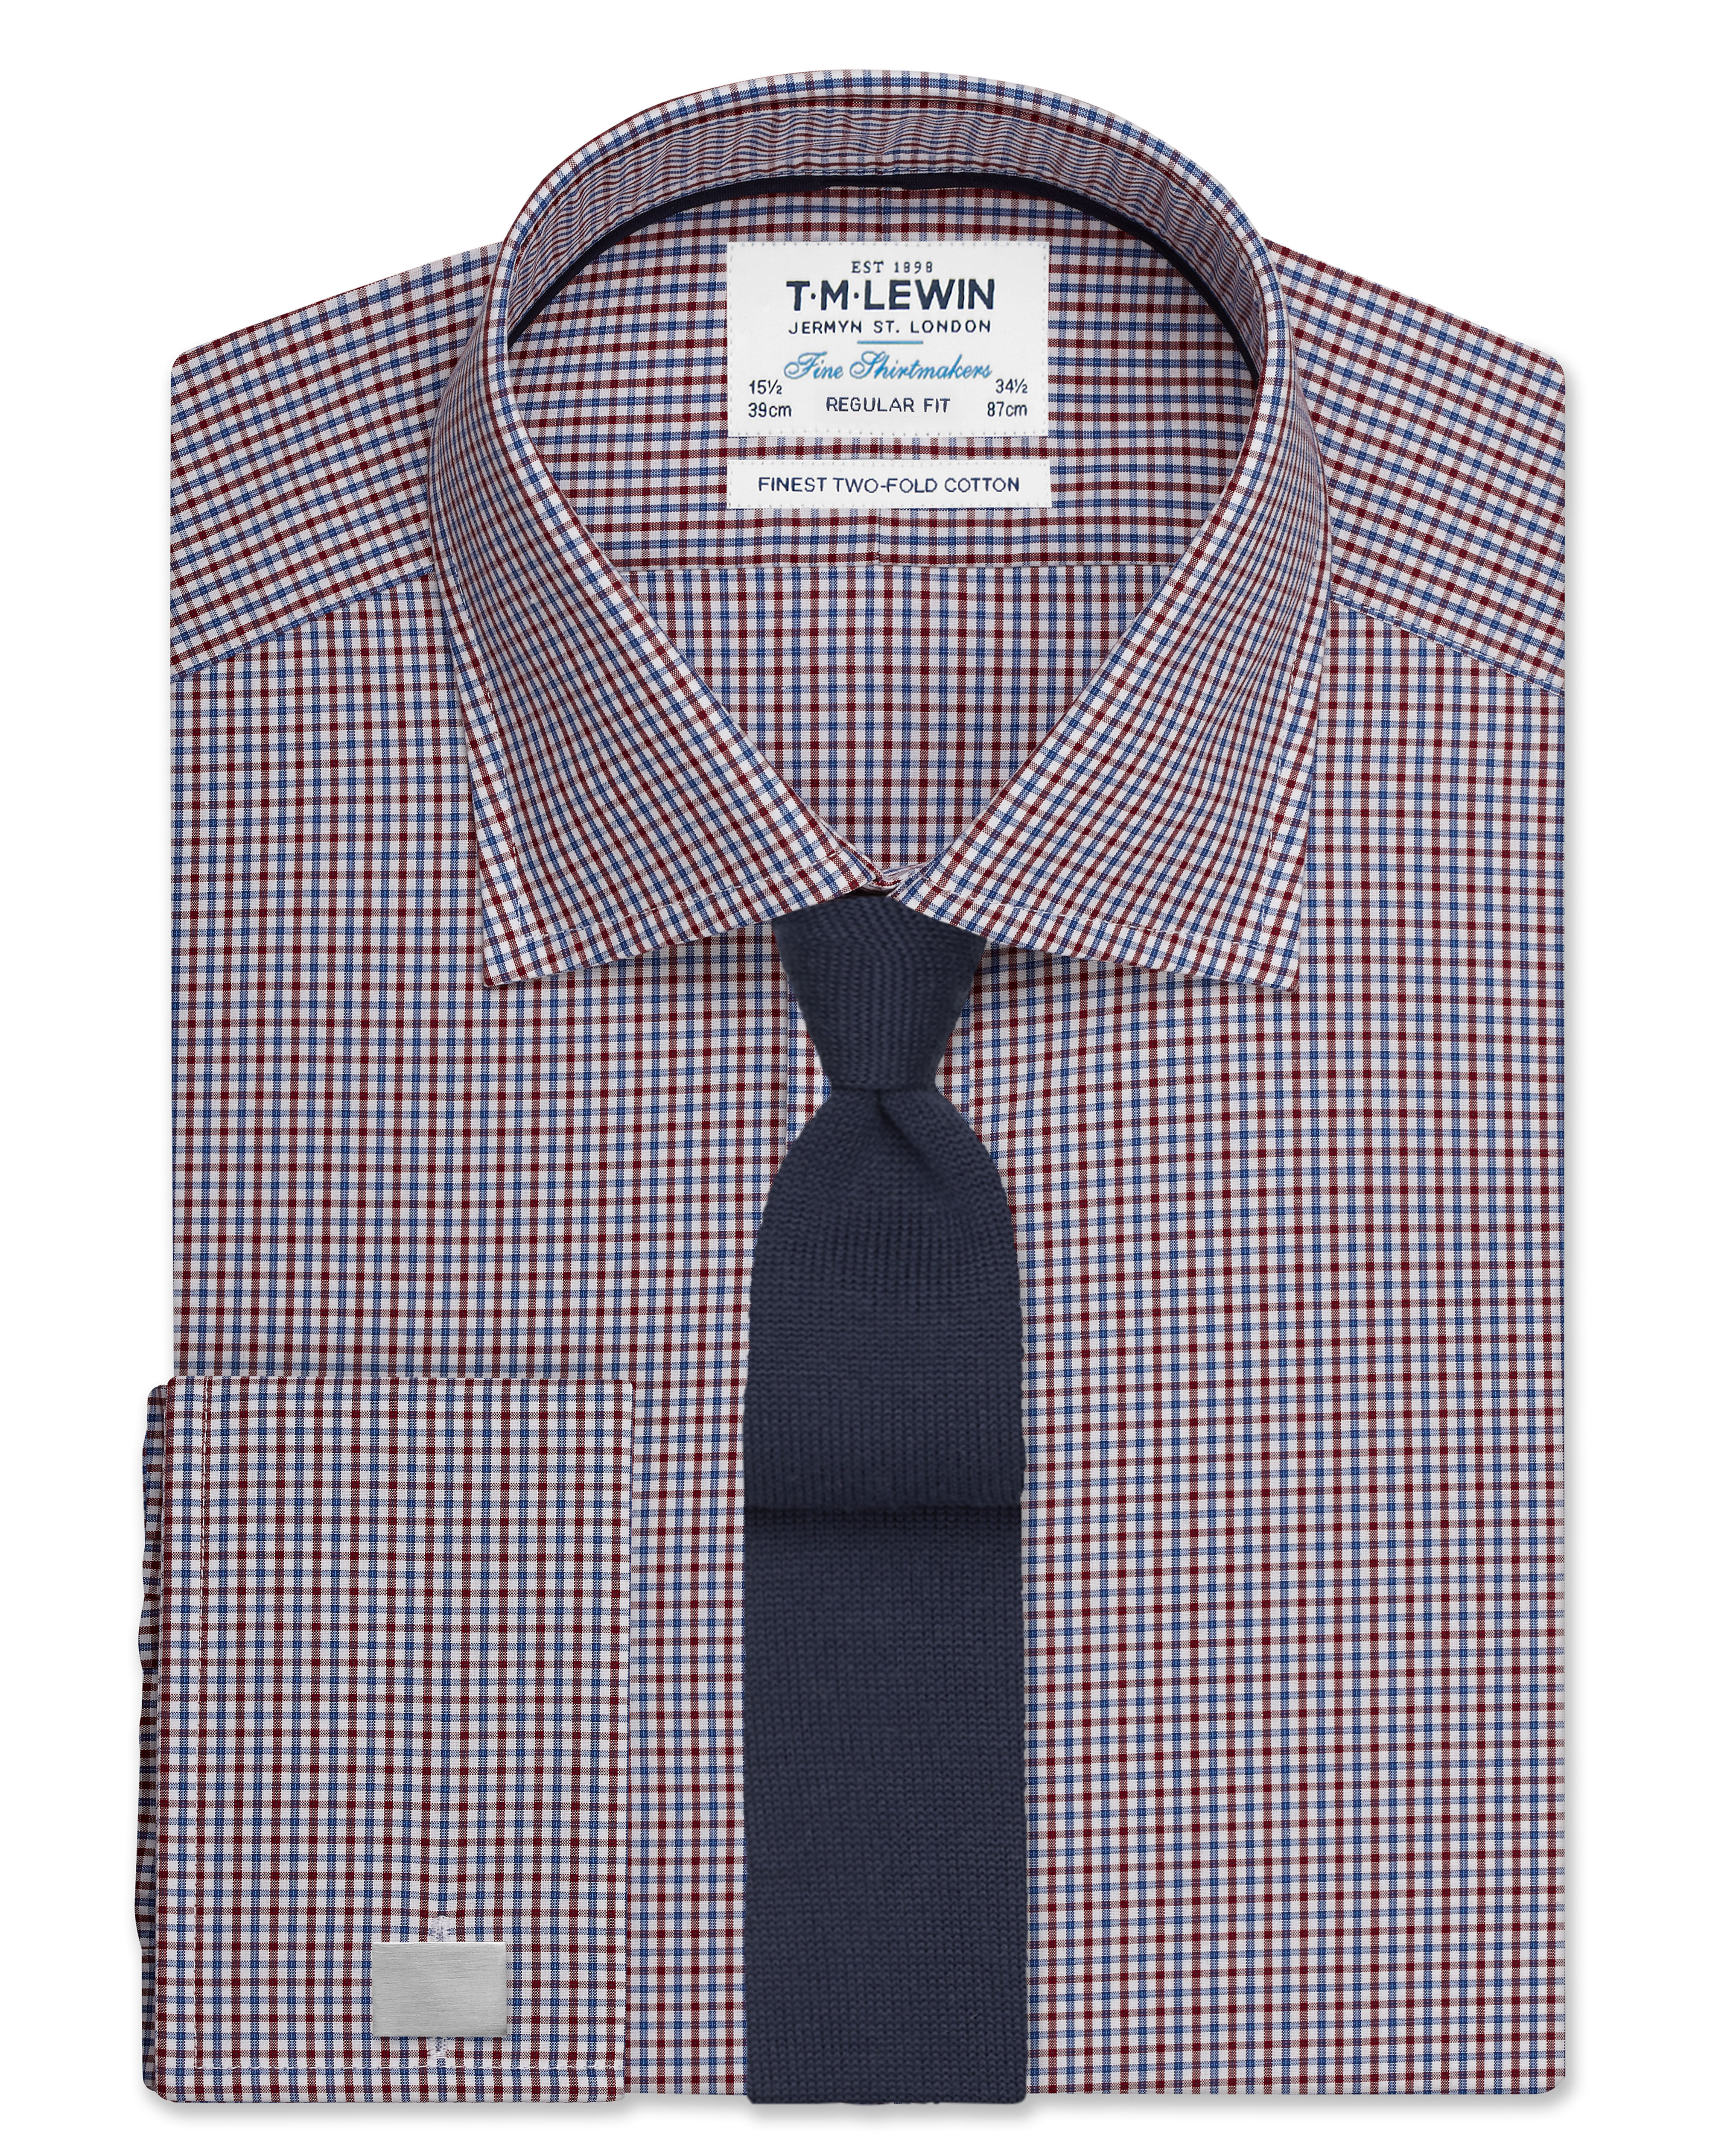 Regular Fit shirts regular fit burgundy and navy micro check shirt - double cuff GLSALNR